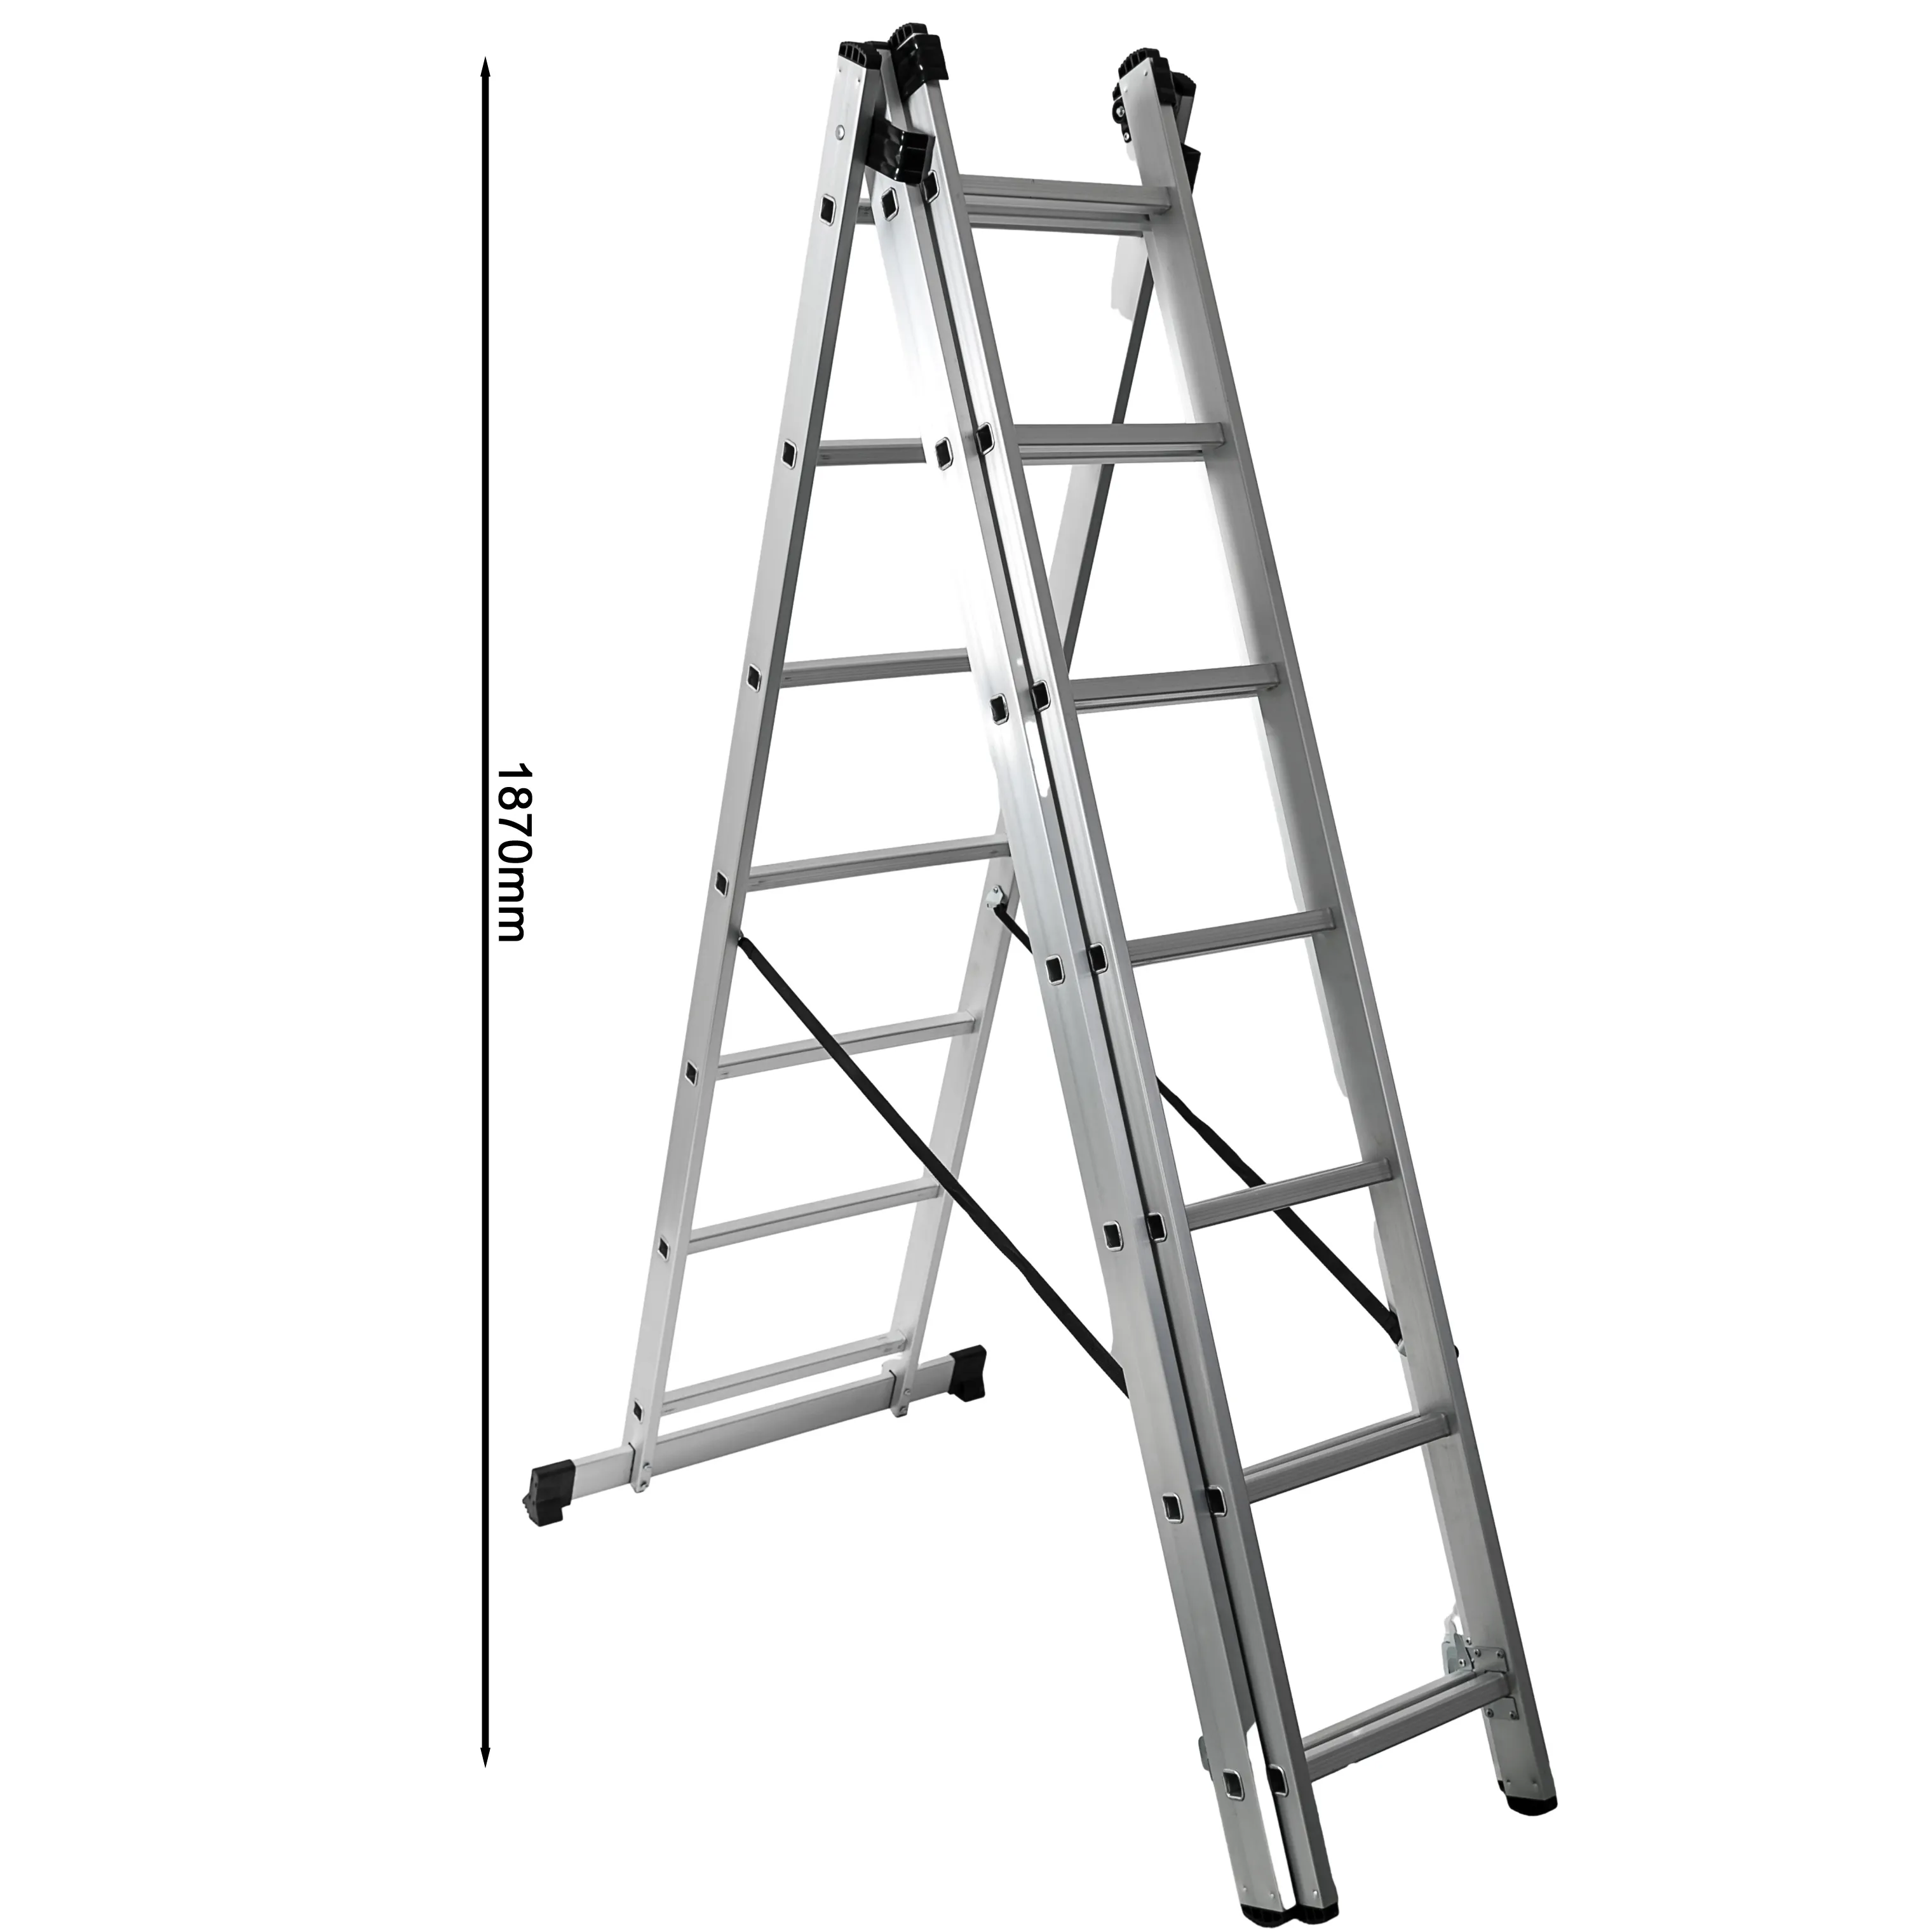 Double sided telescopic ladder Construction aluminium used ladders for sale